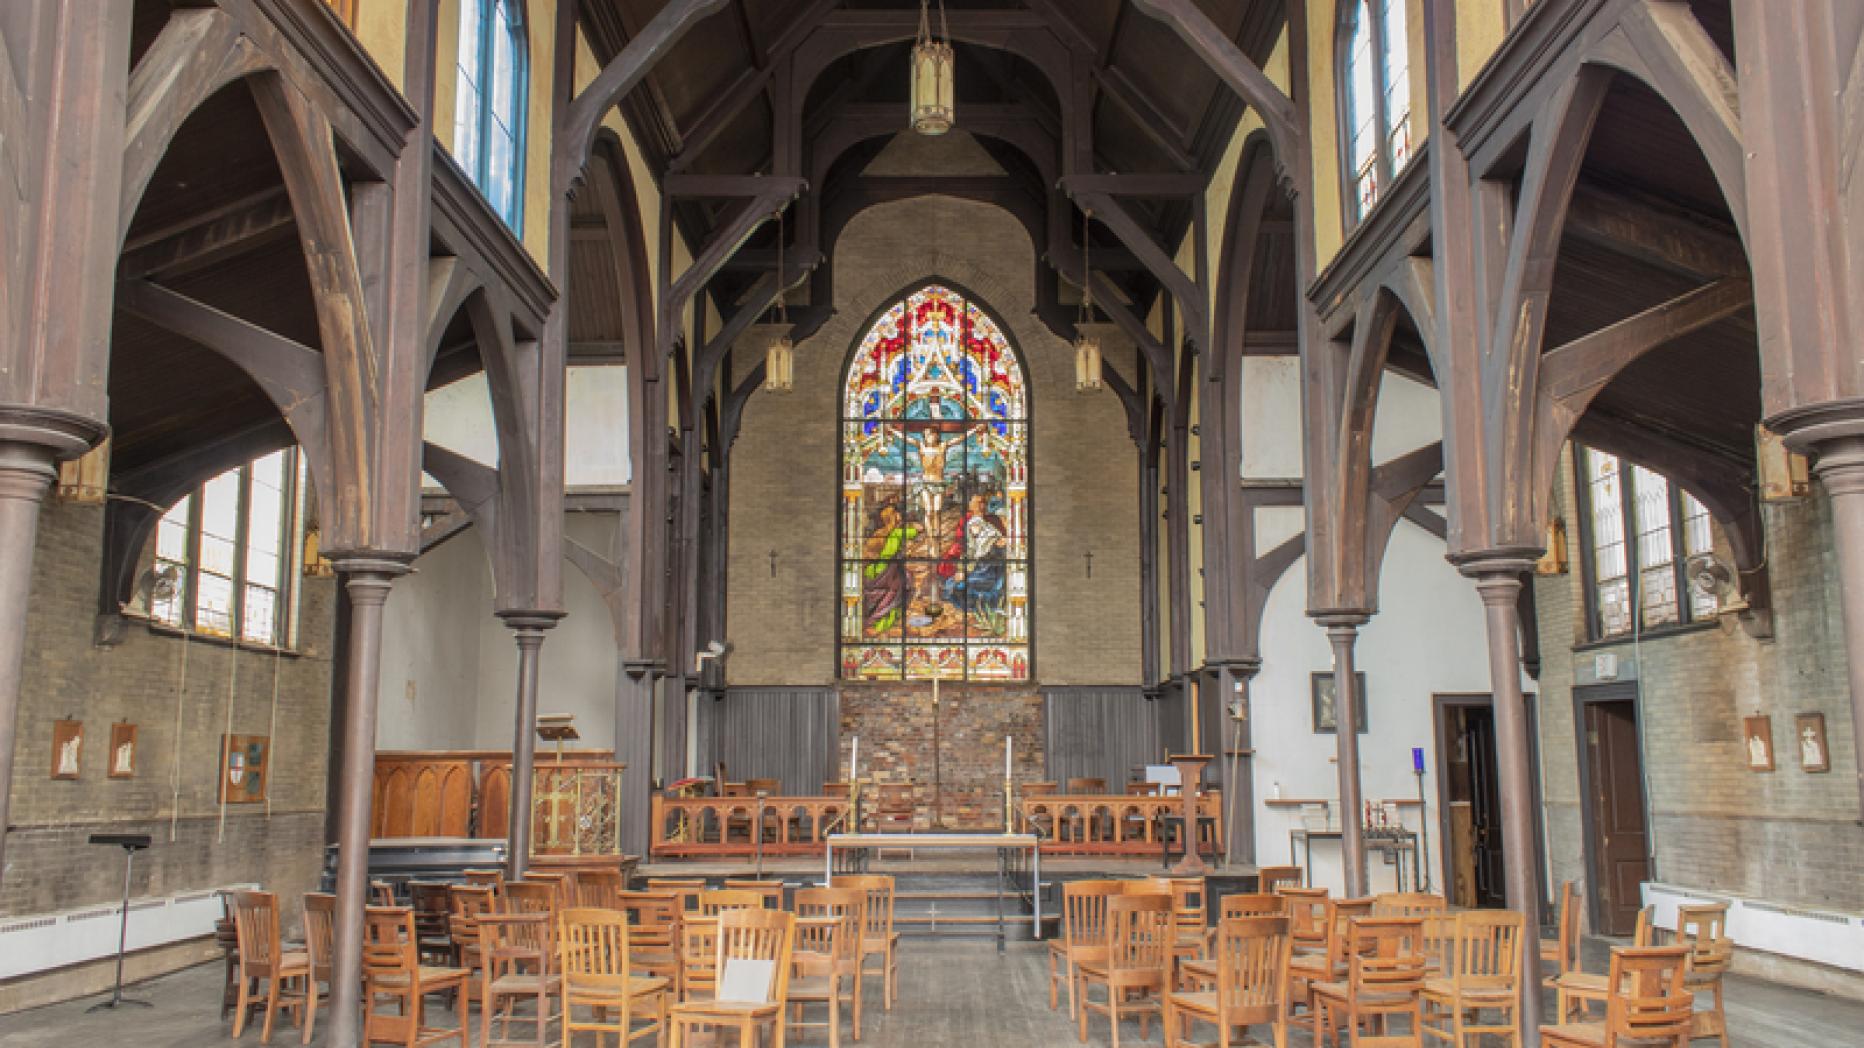 Interior of a Church with wood arches and a colorshop stained glass altarpiece 